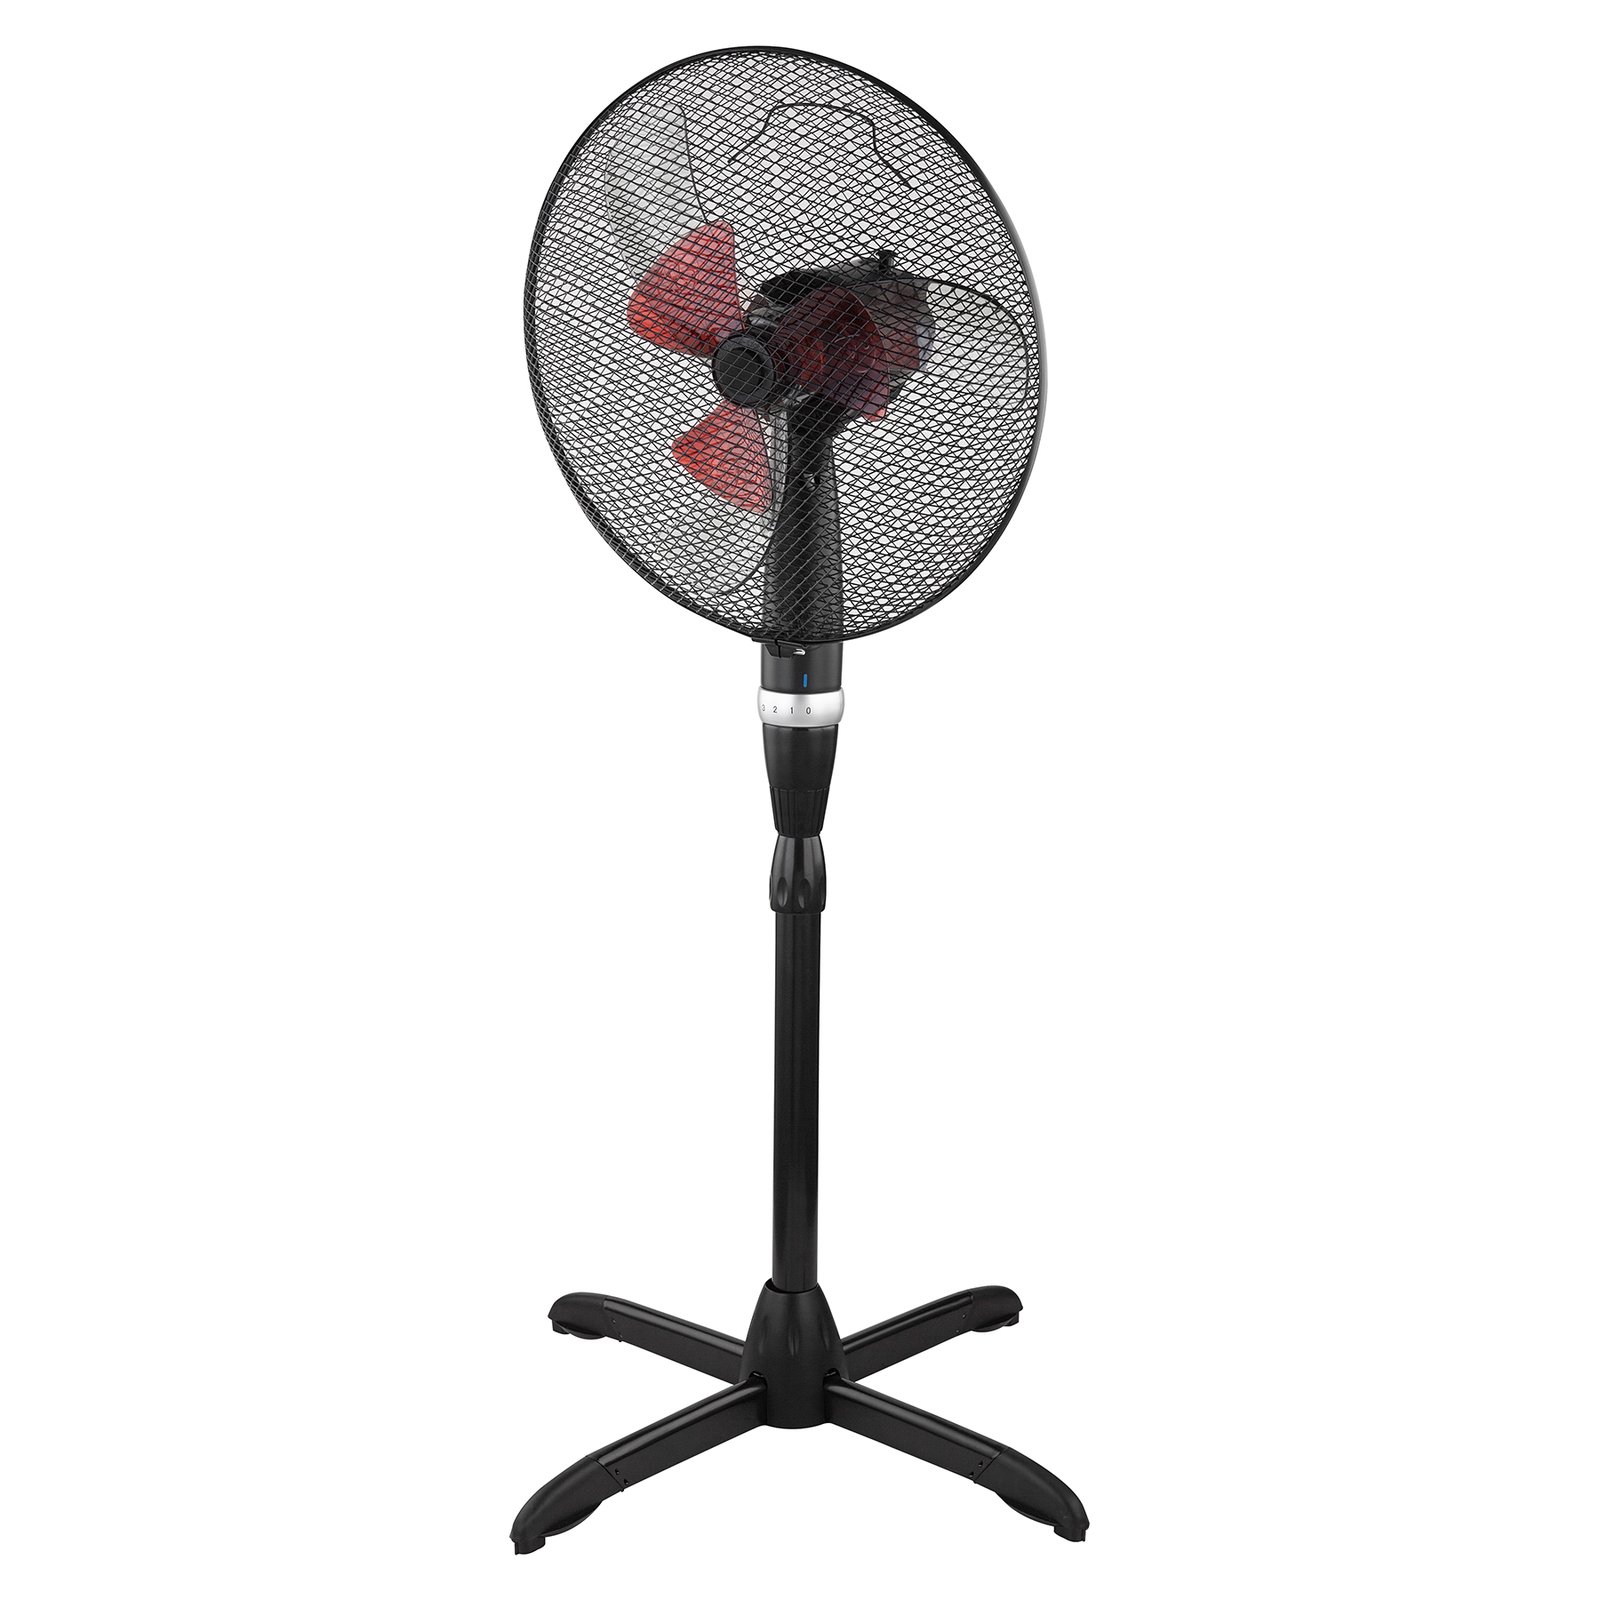 Blower pedestal fan with a timer, 3 levels